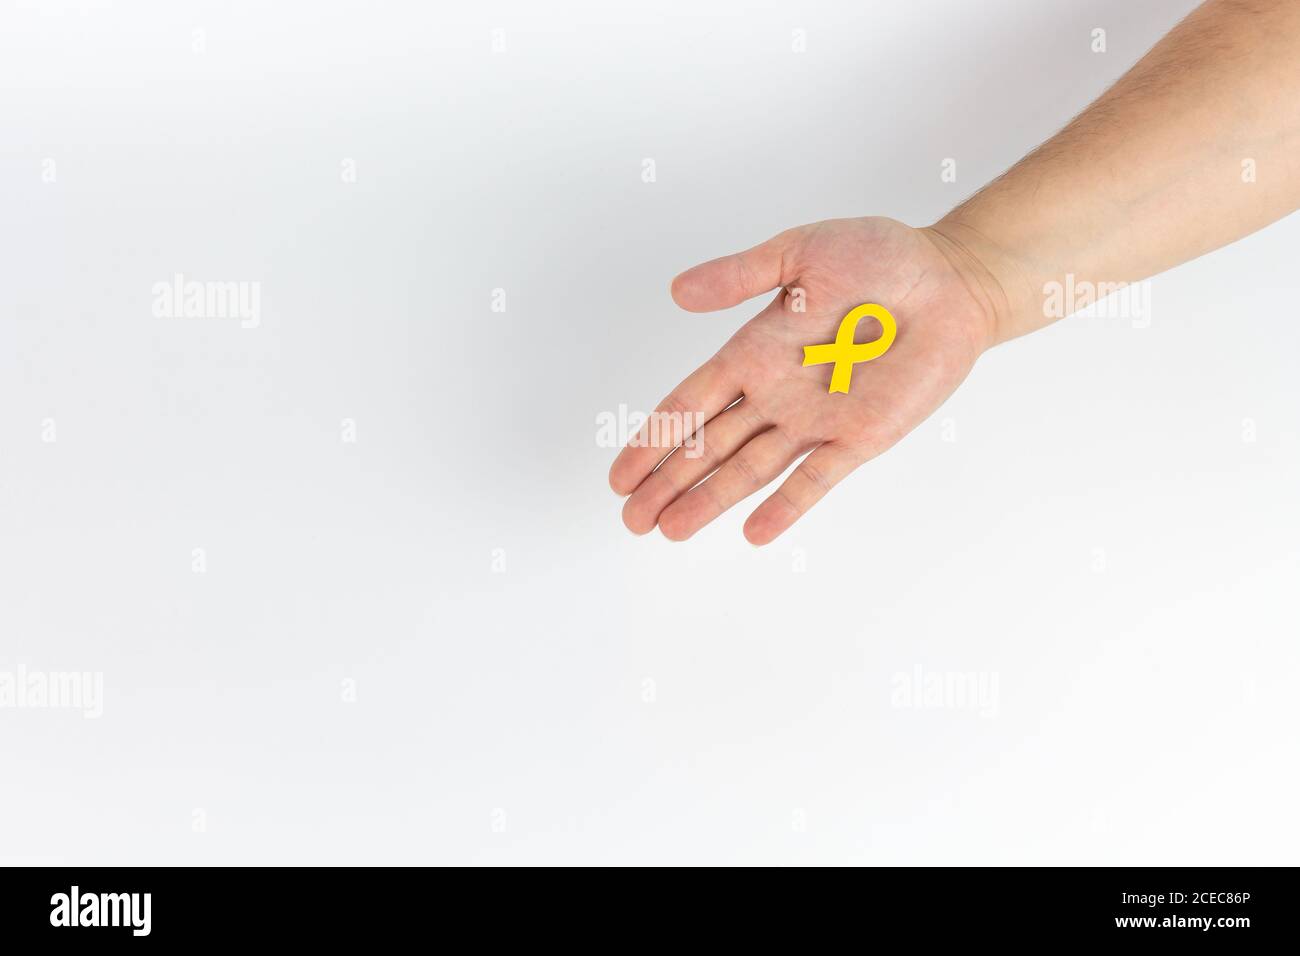 View of a hand holding a small yellow wooden bow on a white background Stock Photo